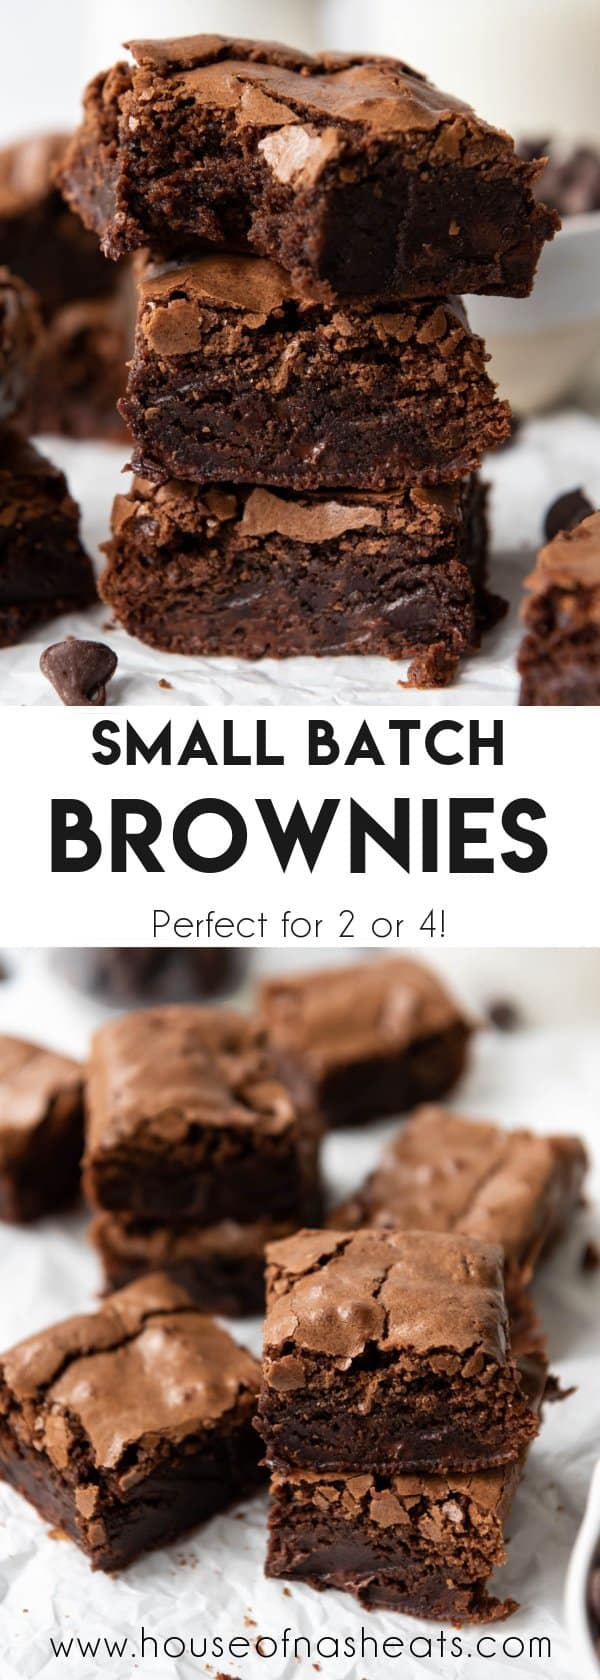 A collage of images of fudgy brownies with text overlay.